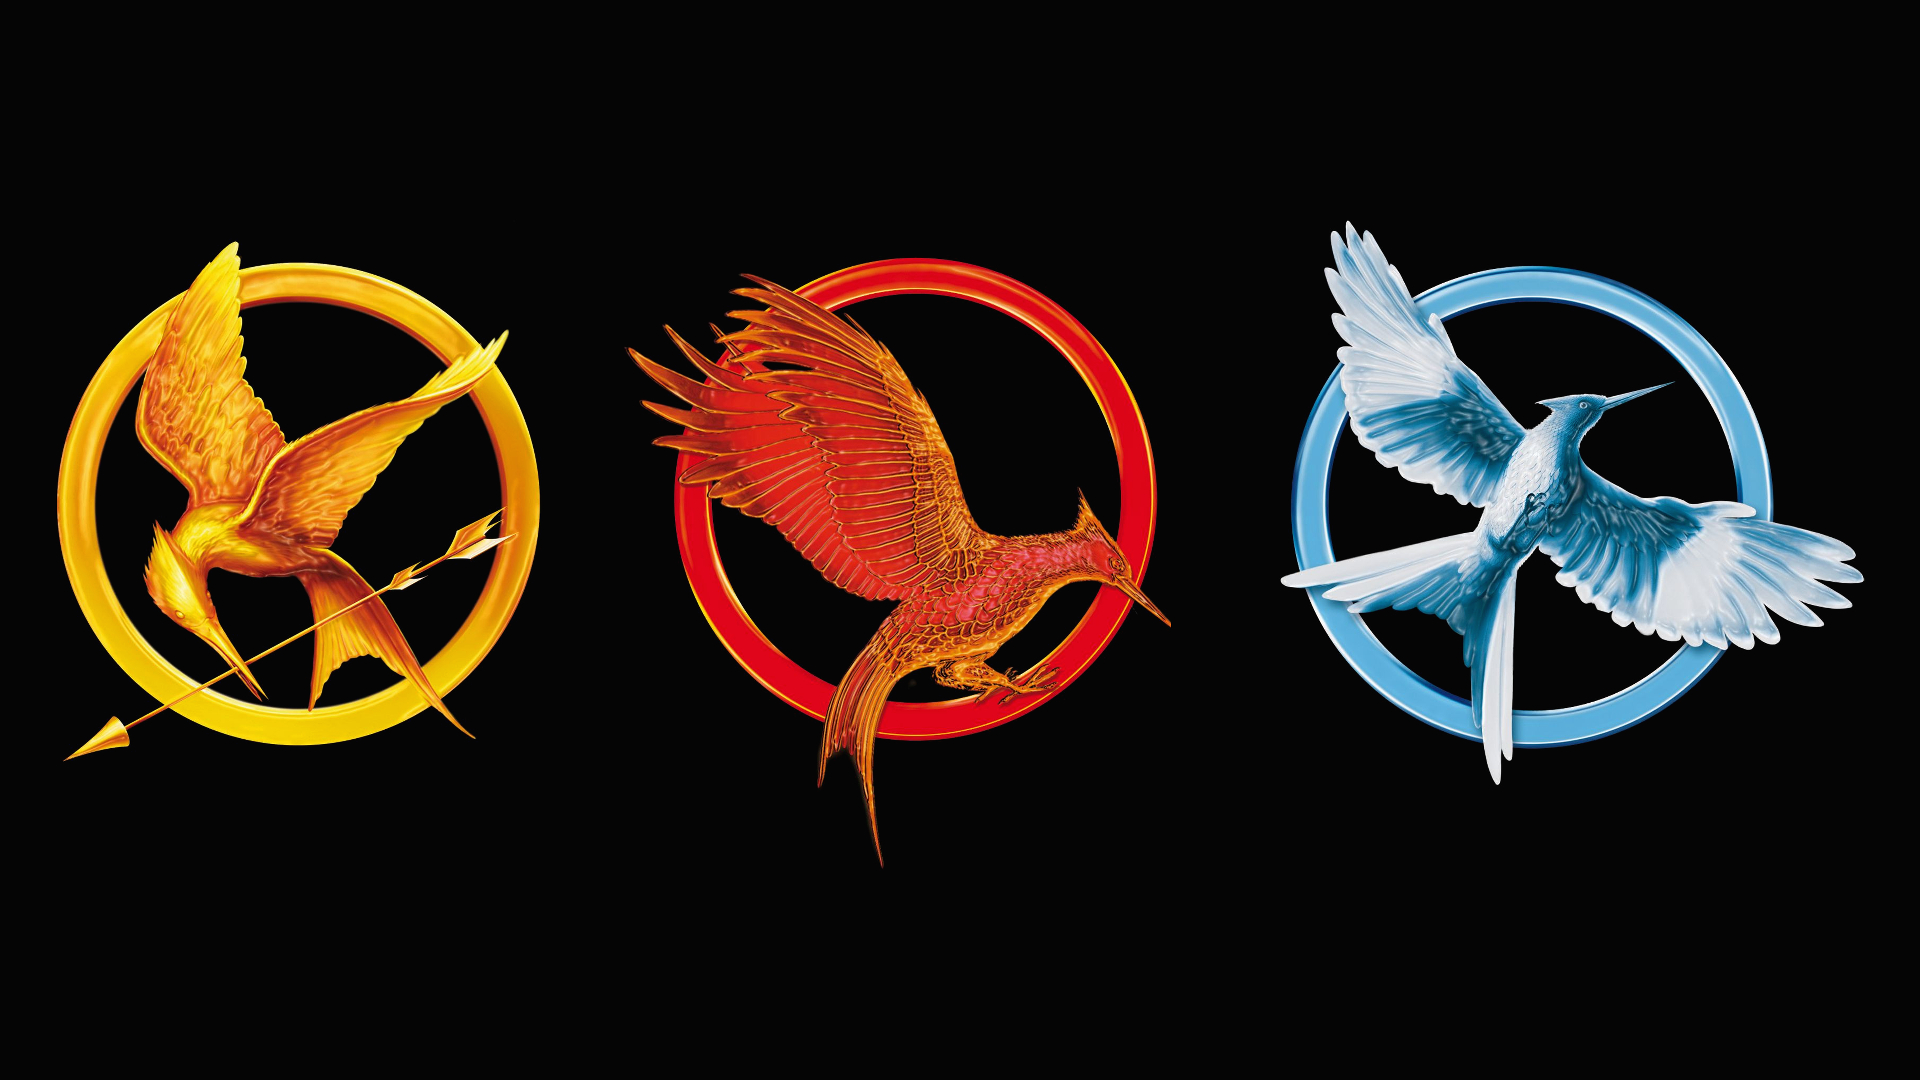 Movie The Hunger Games 1920x1080